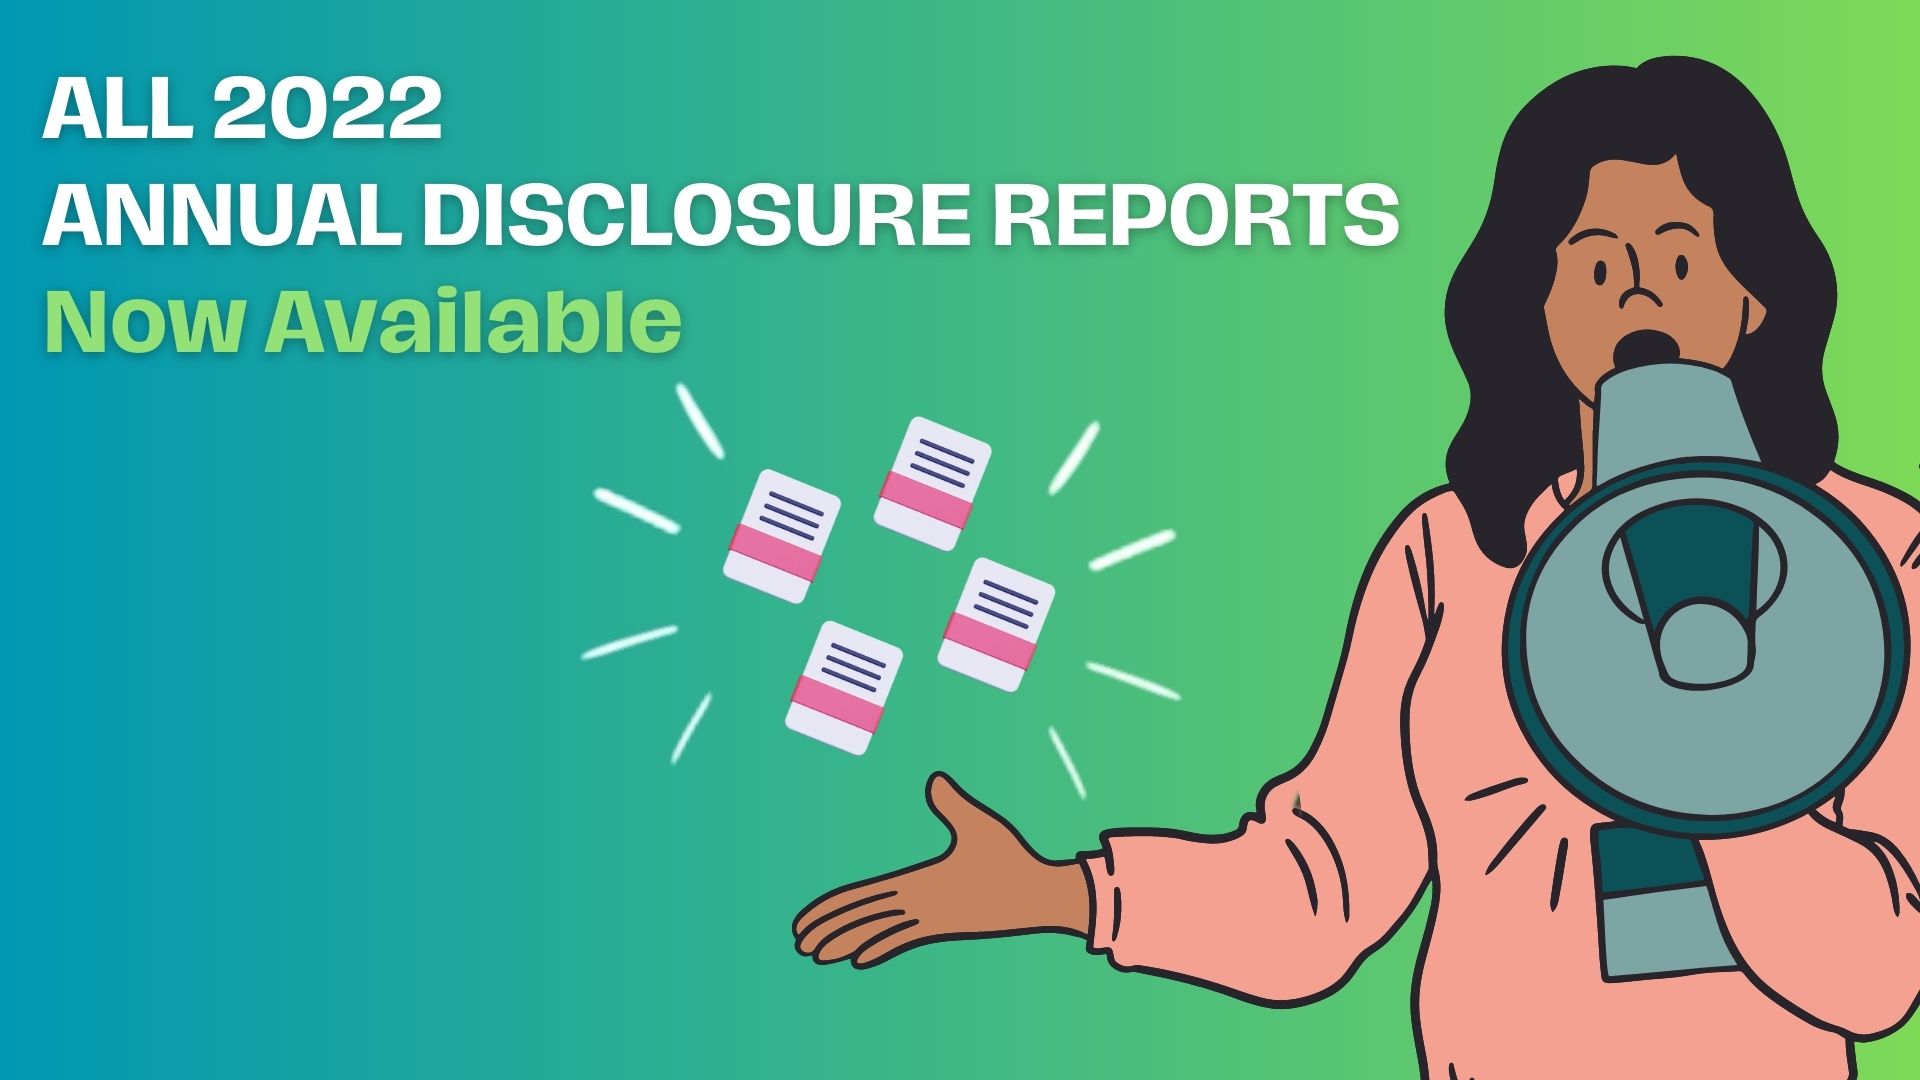 2022 Annual Disclosure Reports for all filers available now.
                                           